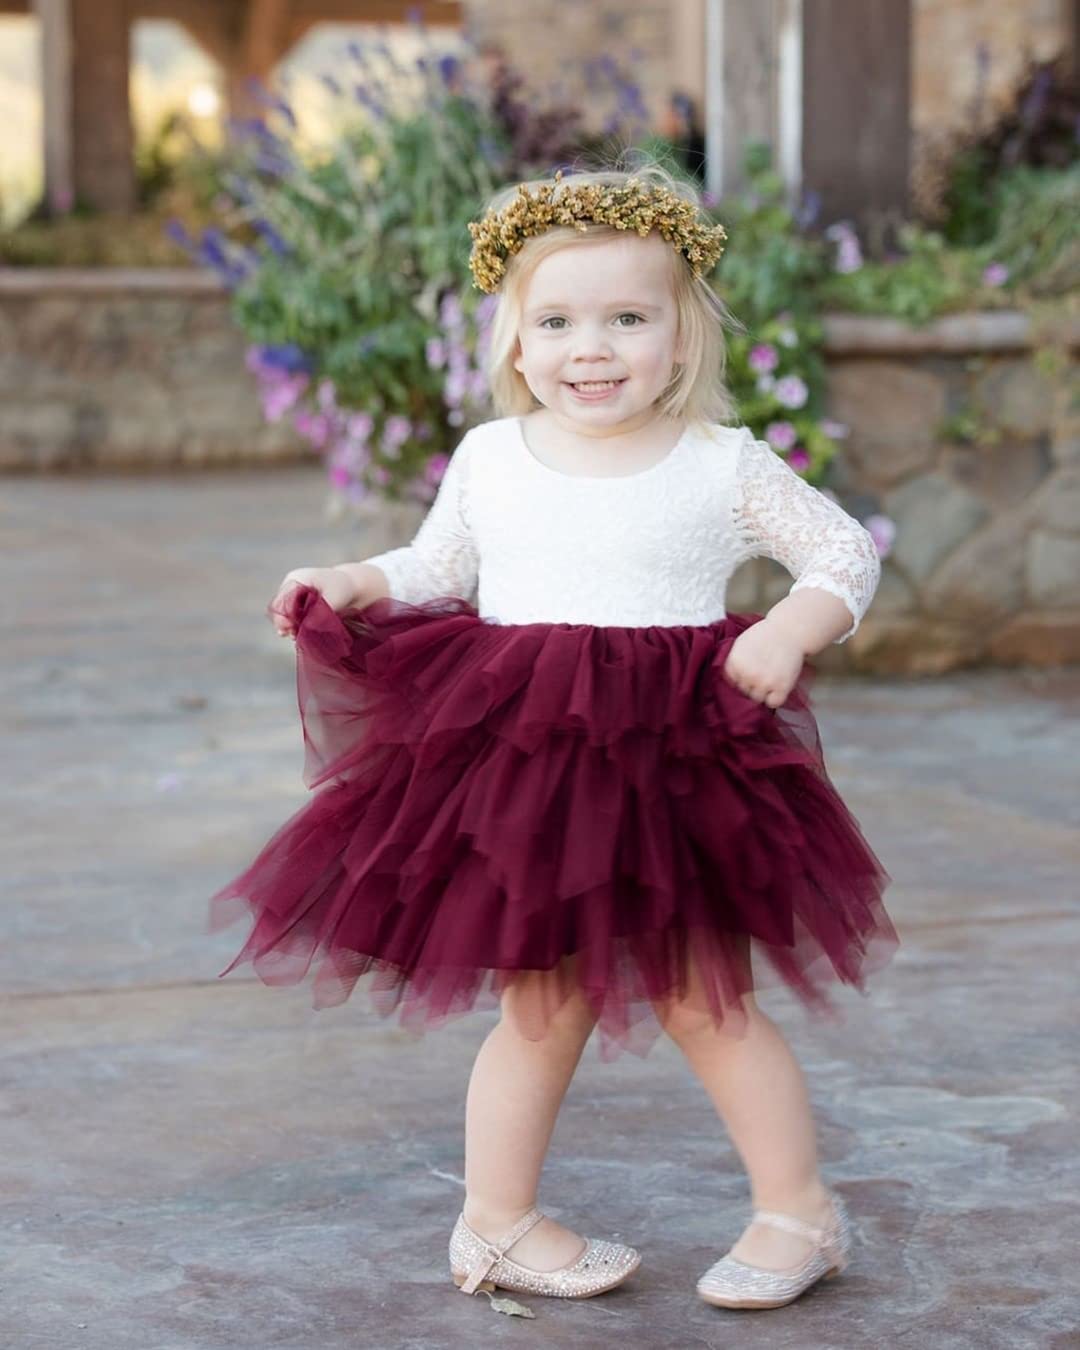 2Bunnies Flower Girl Dress Peony Lace Back A-Line Long Sleeve Tiered Tulle Short (Burgundy) - 2BUNNIES